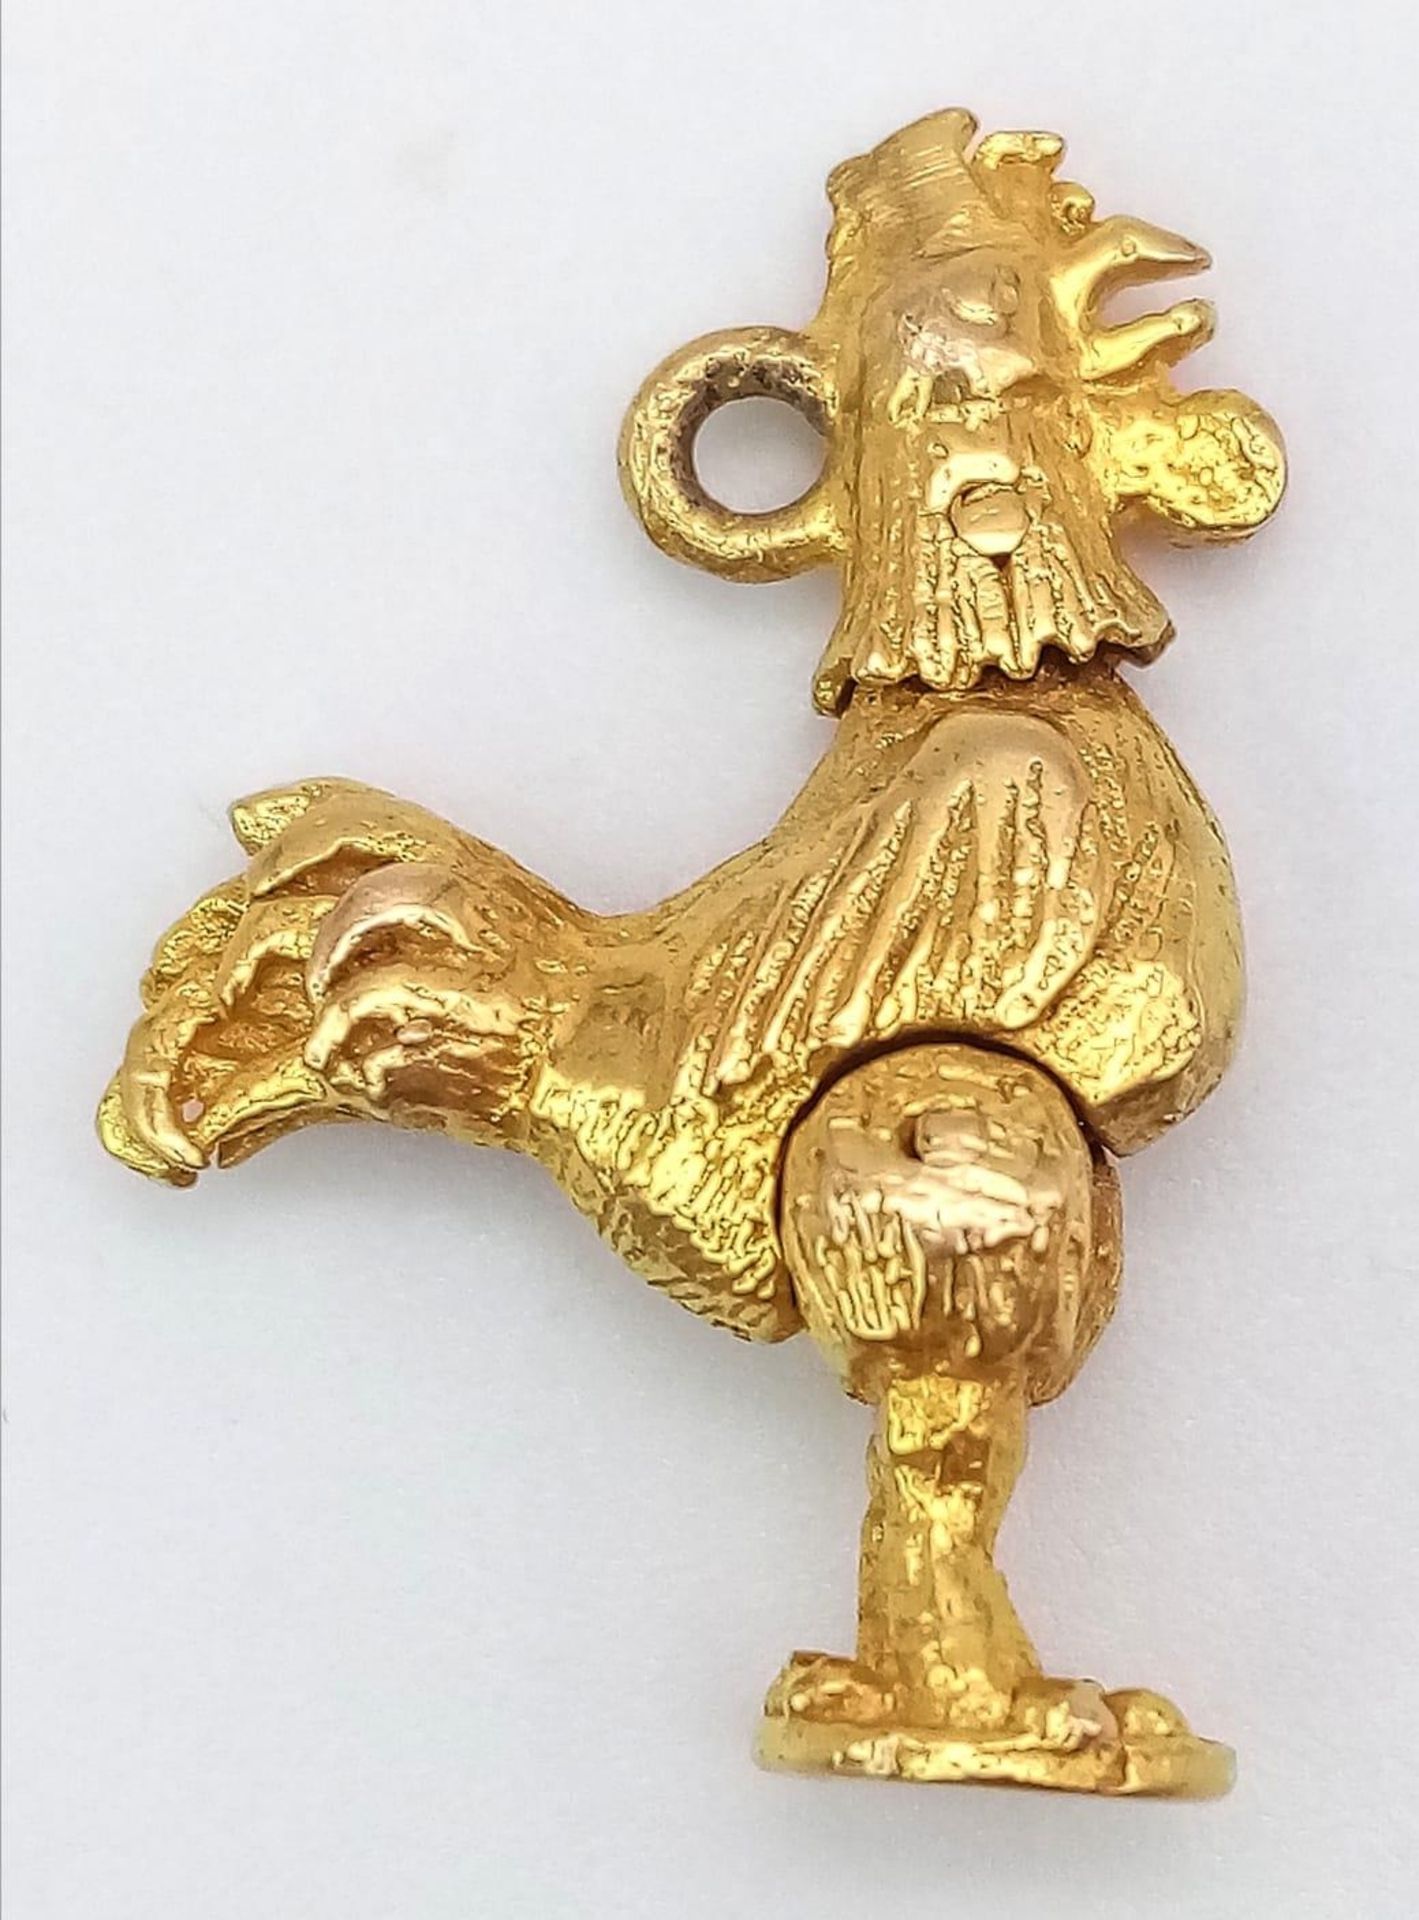 A 9K Yellow Gold Articulated Cock Charm/Pendant. 2cm. 3.33g weight.